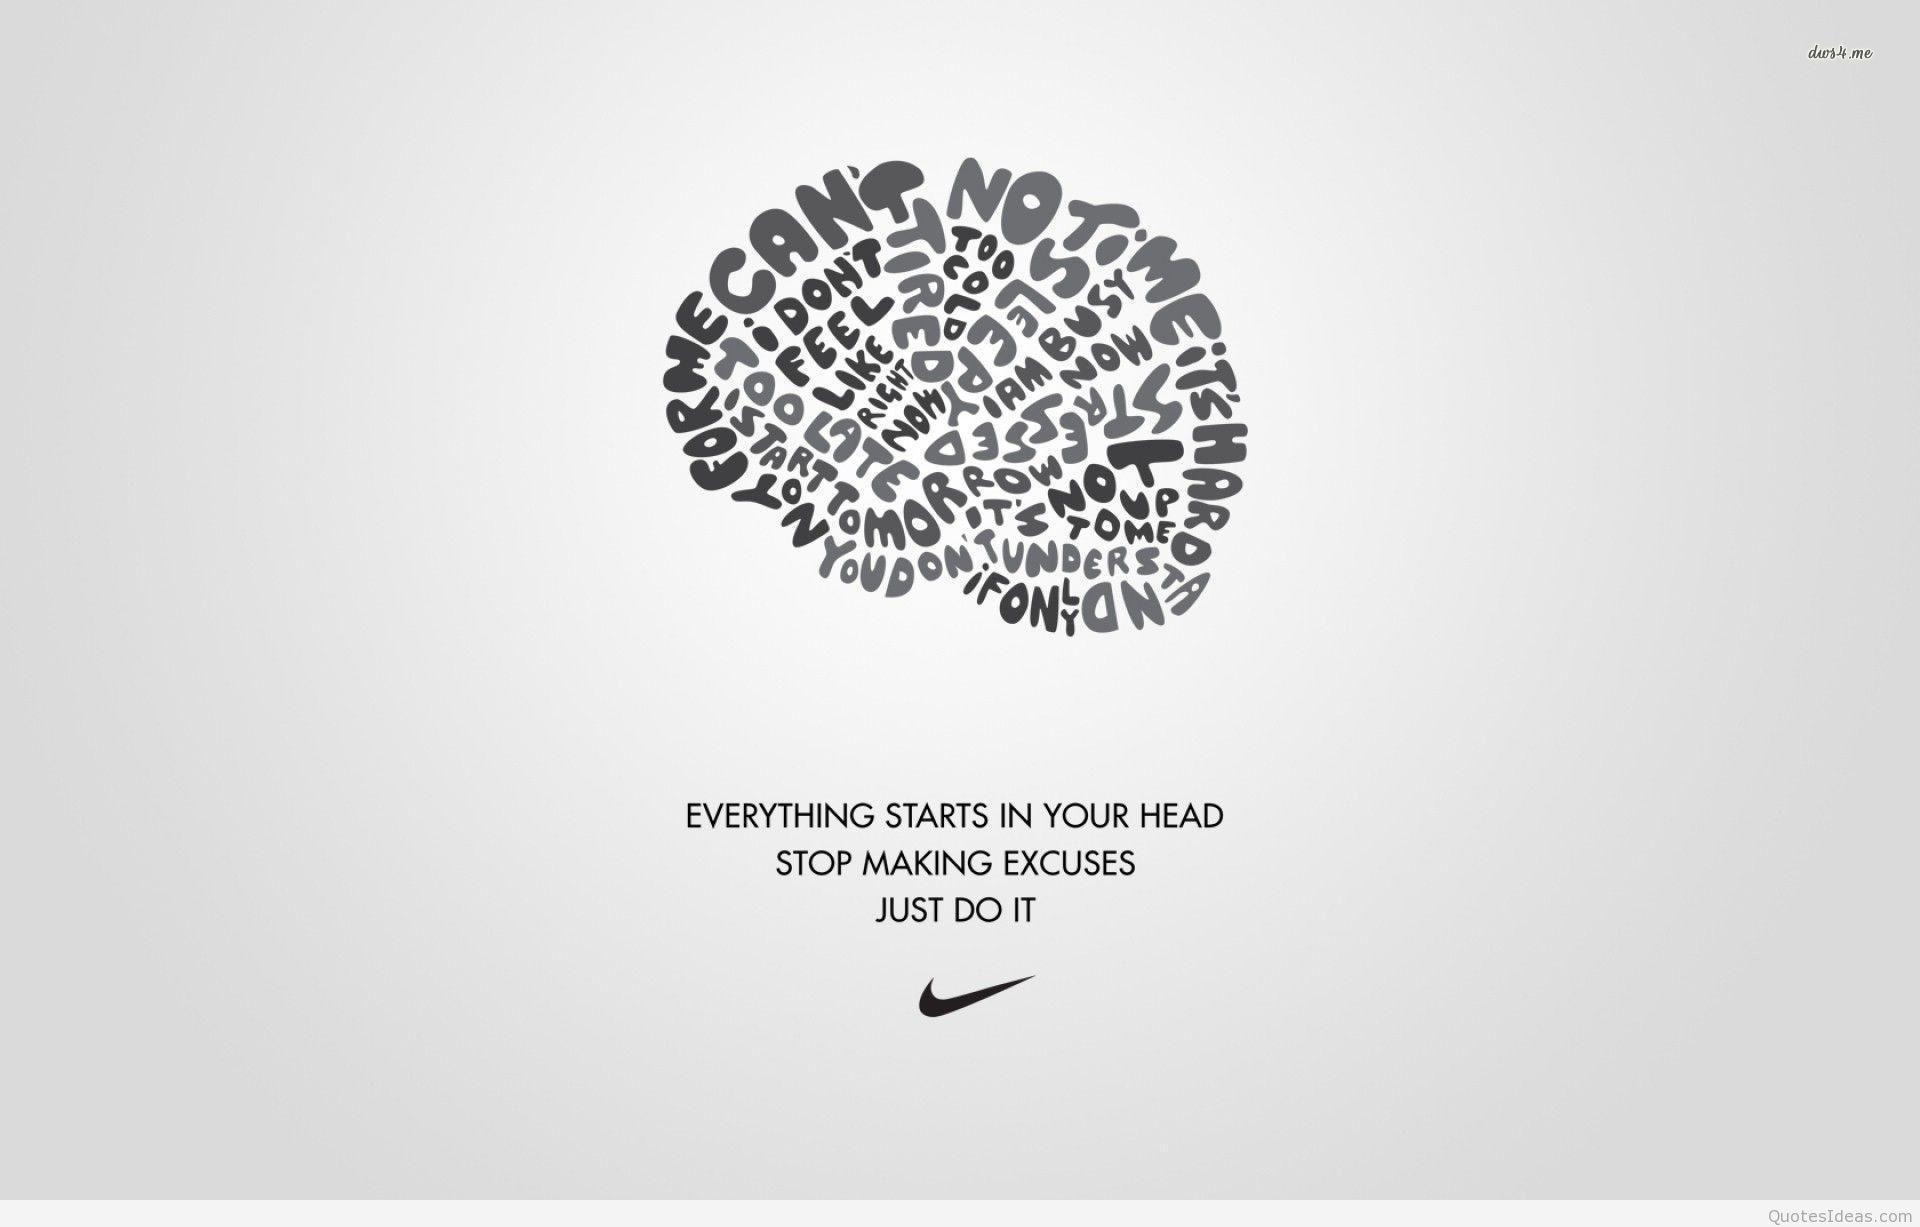 buy > nike quotes images, Up to 72% OFF